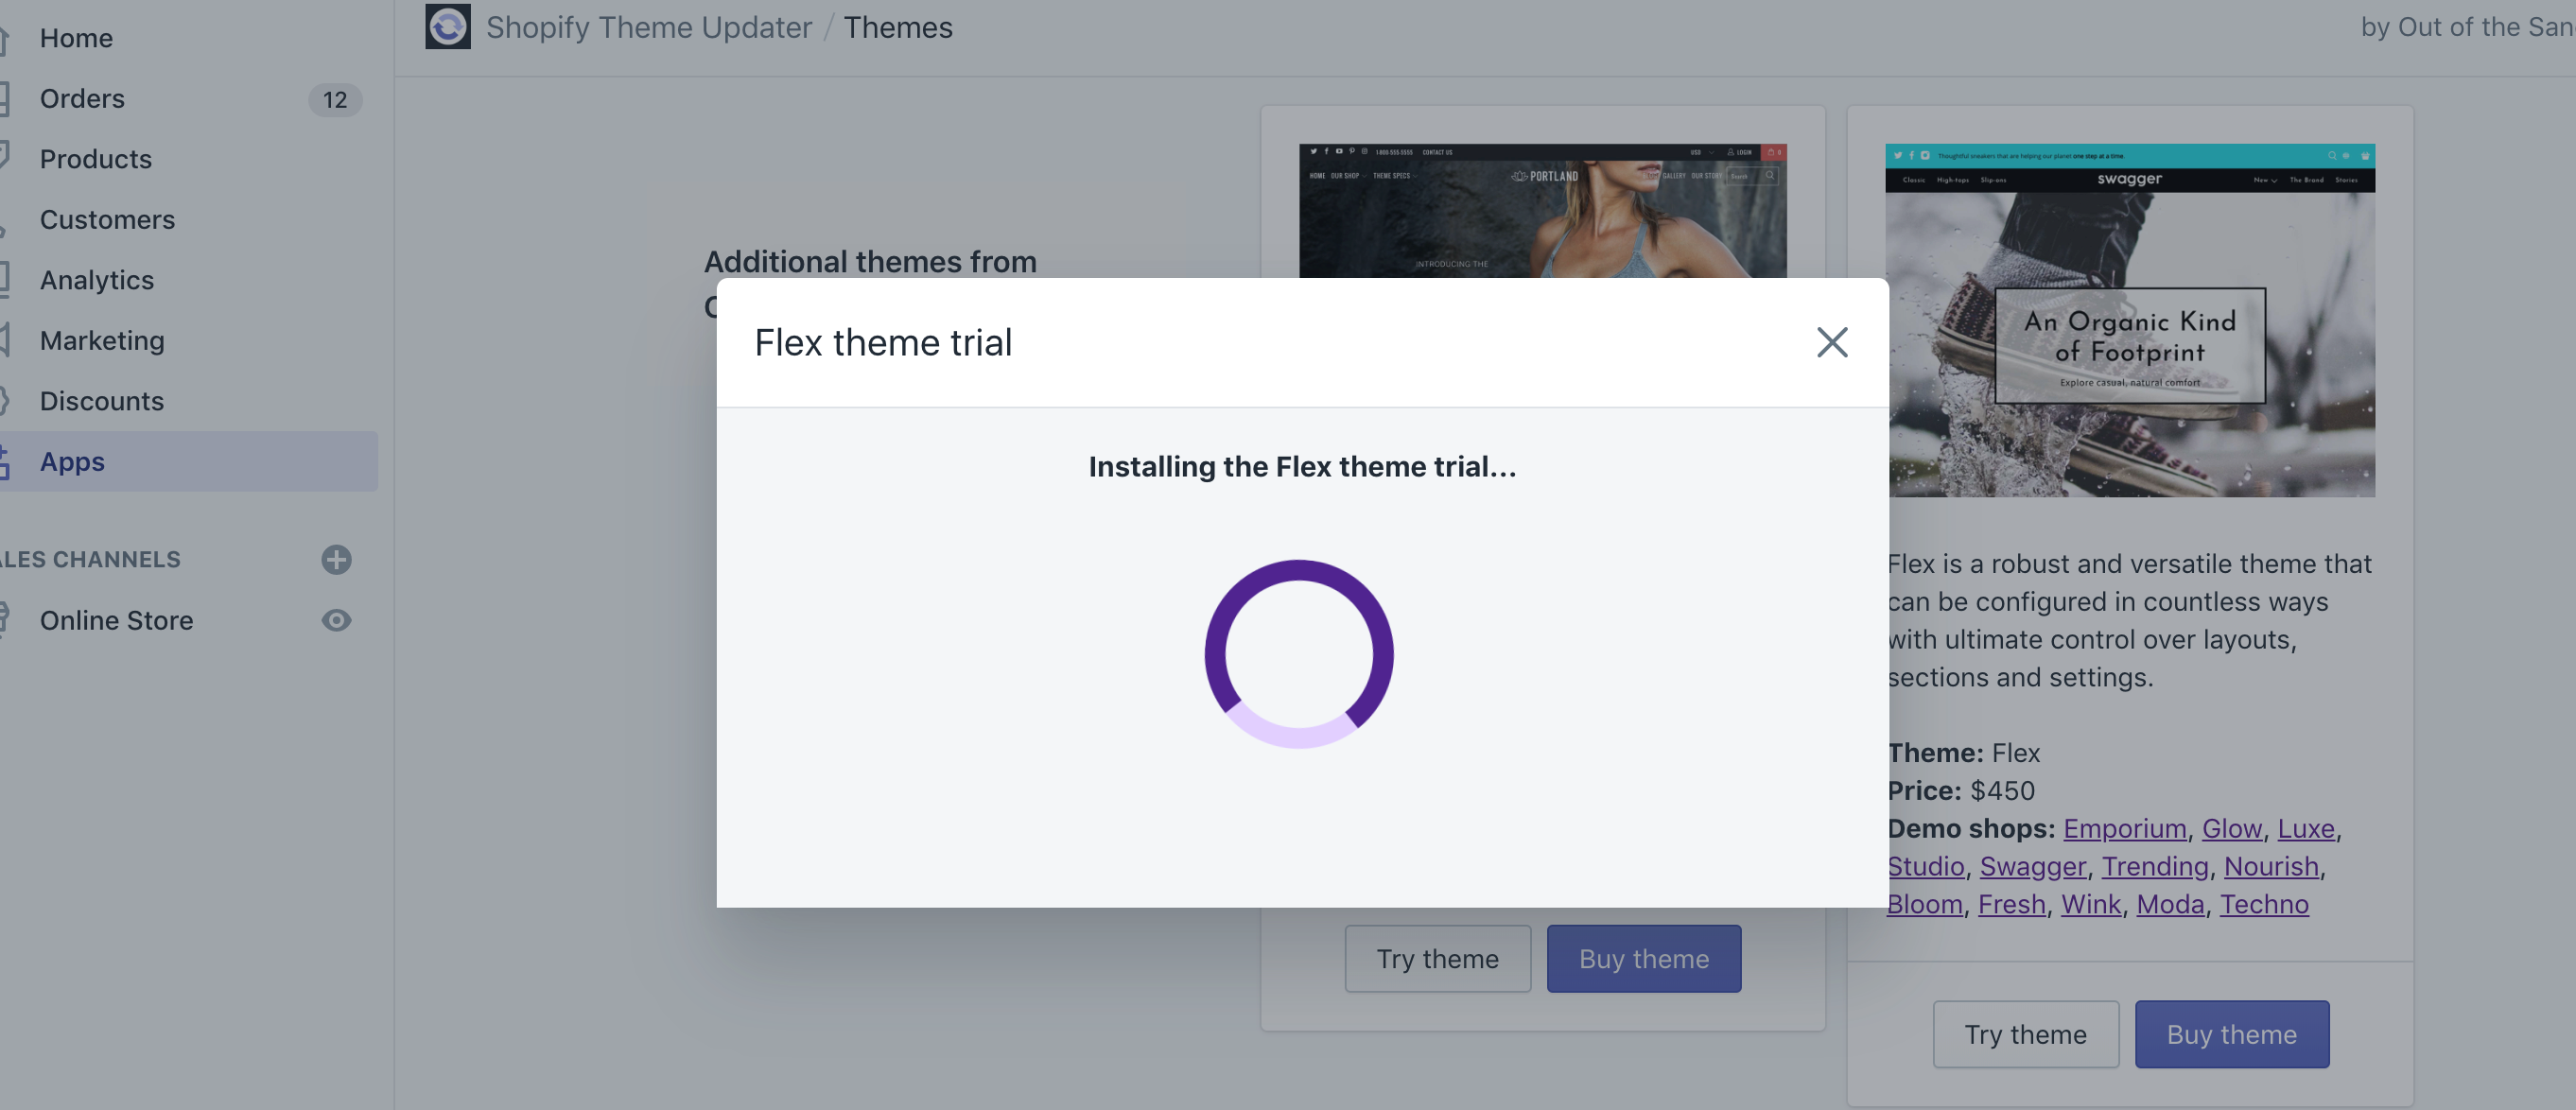 theme-trial-install.png